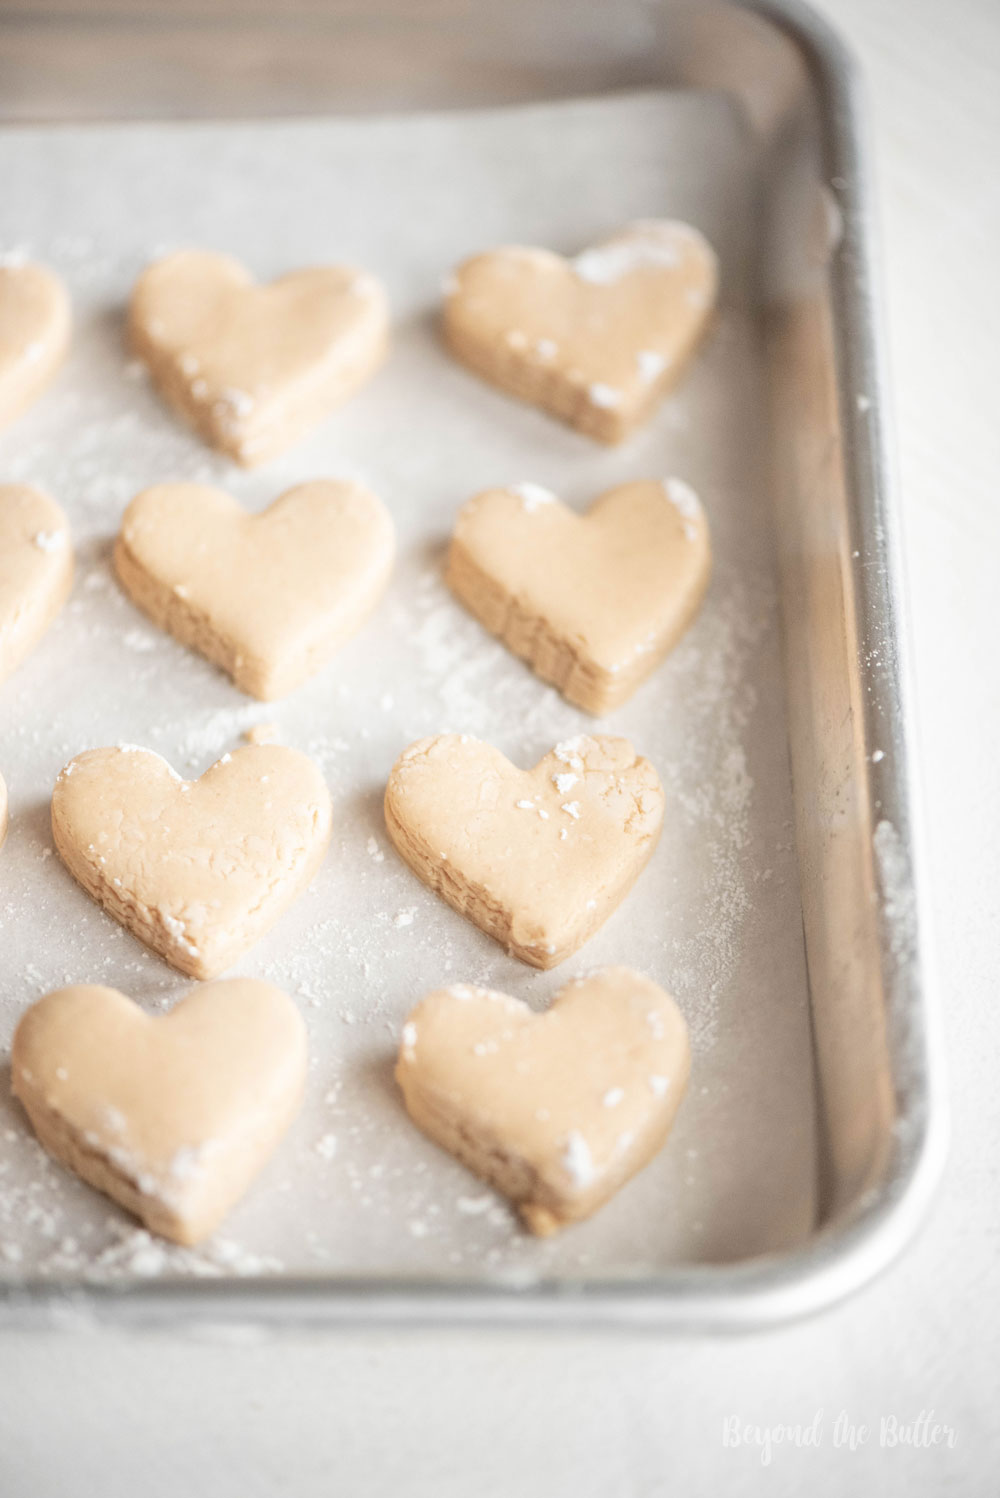 Chocolate Covered Peanut Butter Hearts | Peanut butter hearts cut out and placed on tray ready to be dipped in chocolate | Image and Copyright Policy: Beyond the Butter, LLC